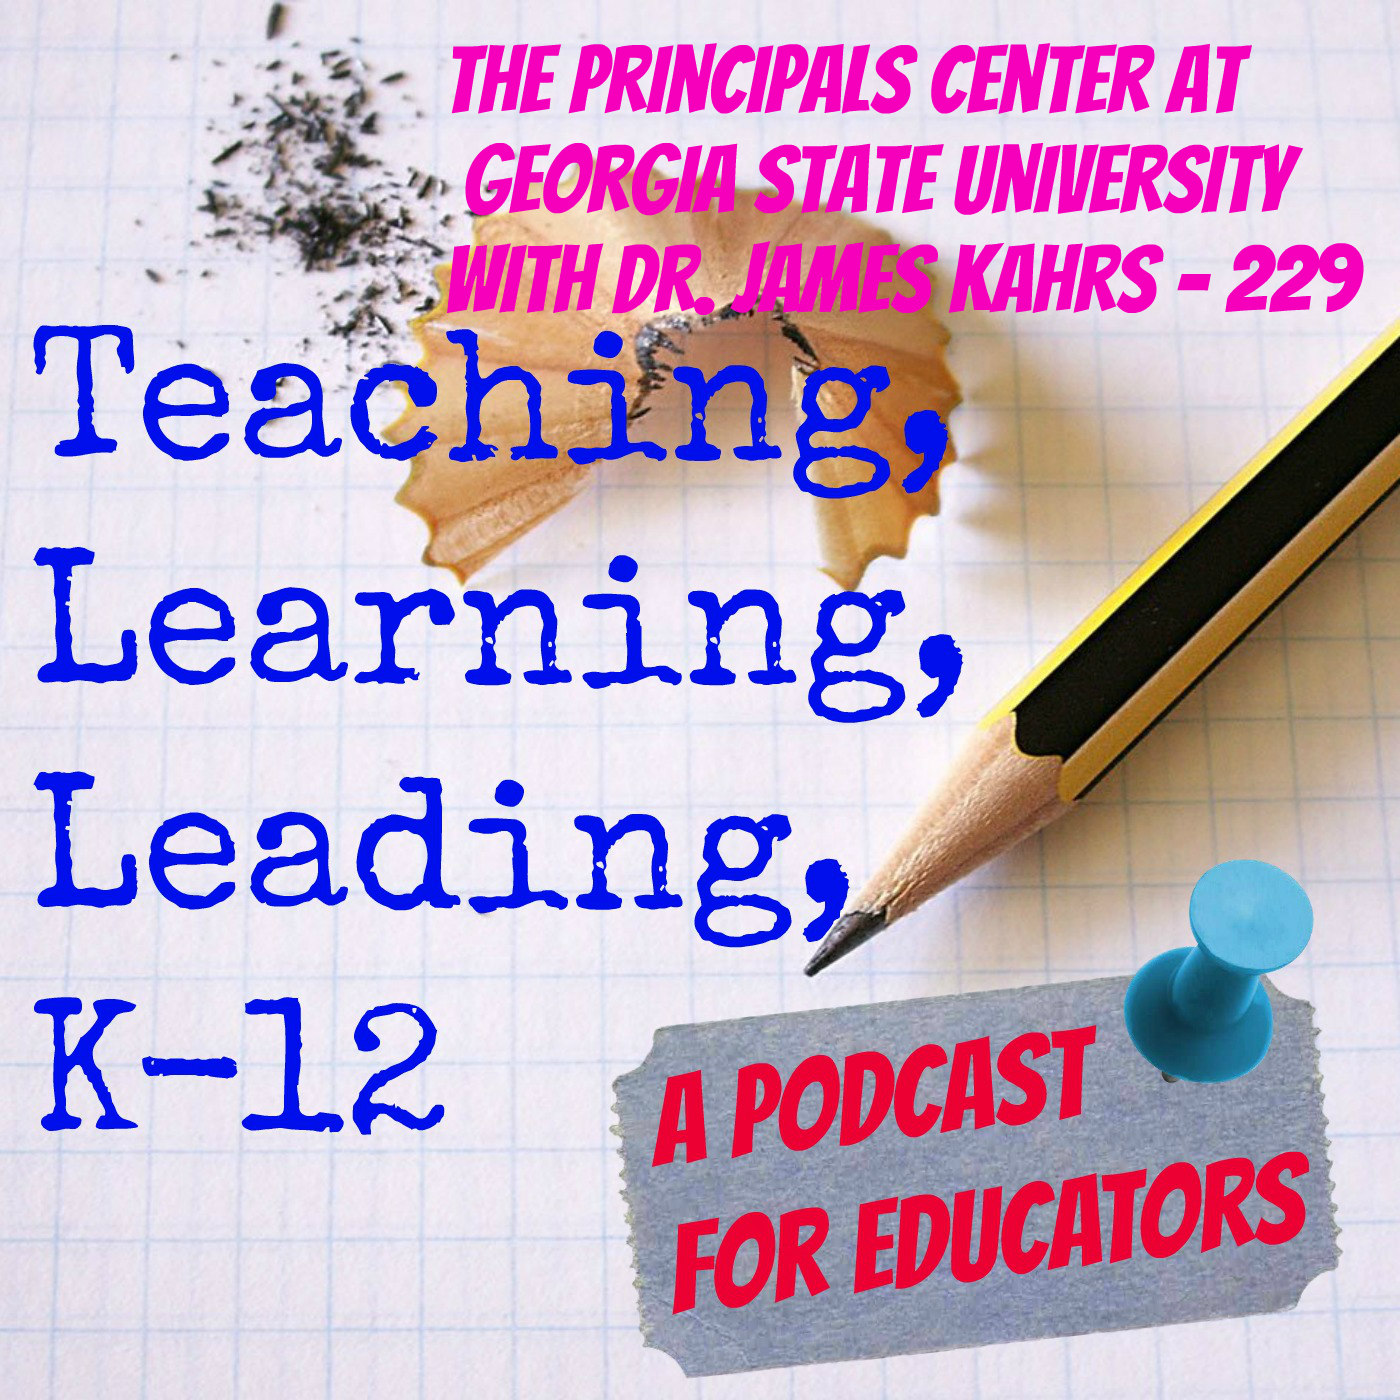 The Principals Center at Georgia State University with Dr. James Kahrs - 229